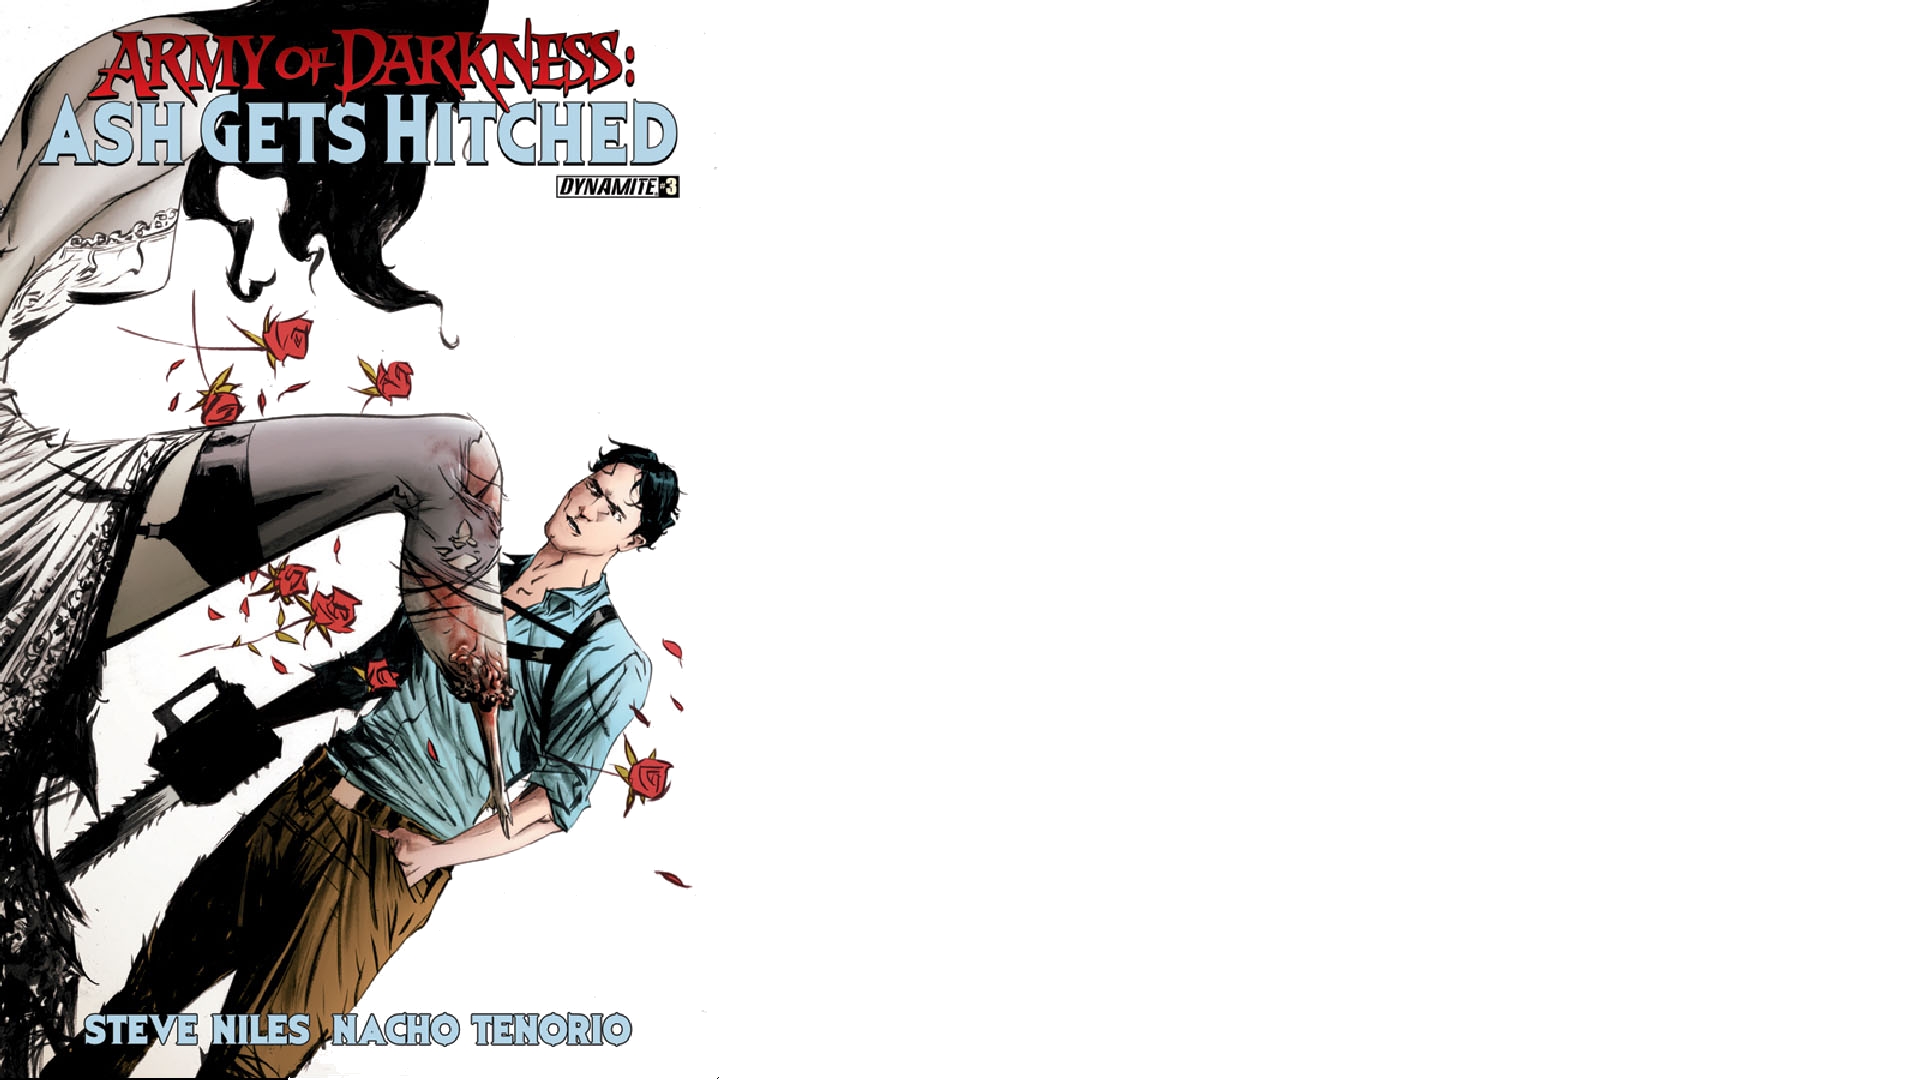 Bande Dessin Es Army Of Darkness Ash Gets Hitched Williams Fond